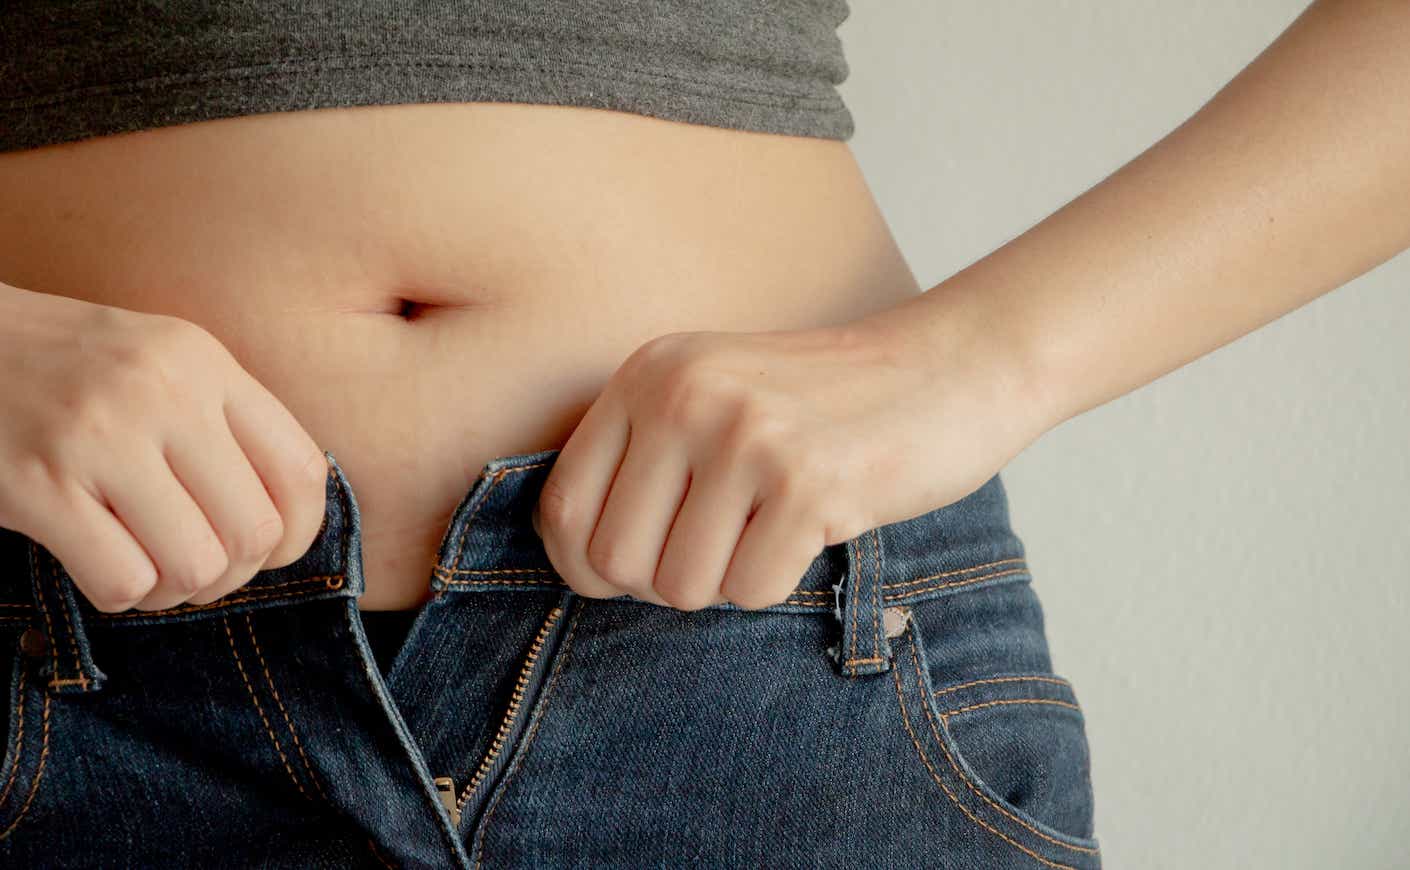 How to Hide Your Menopausal Tummy and Widening Waistline